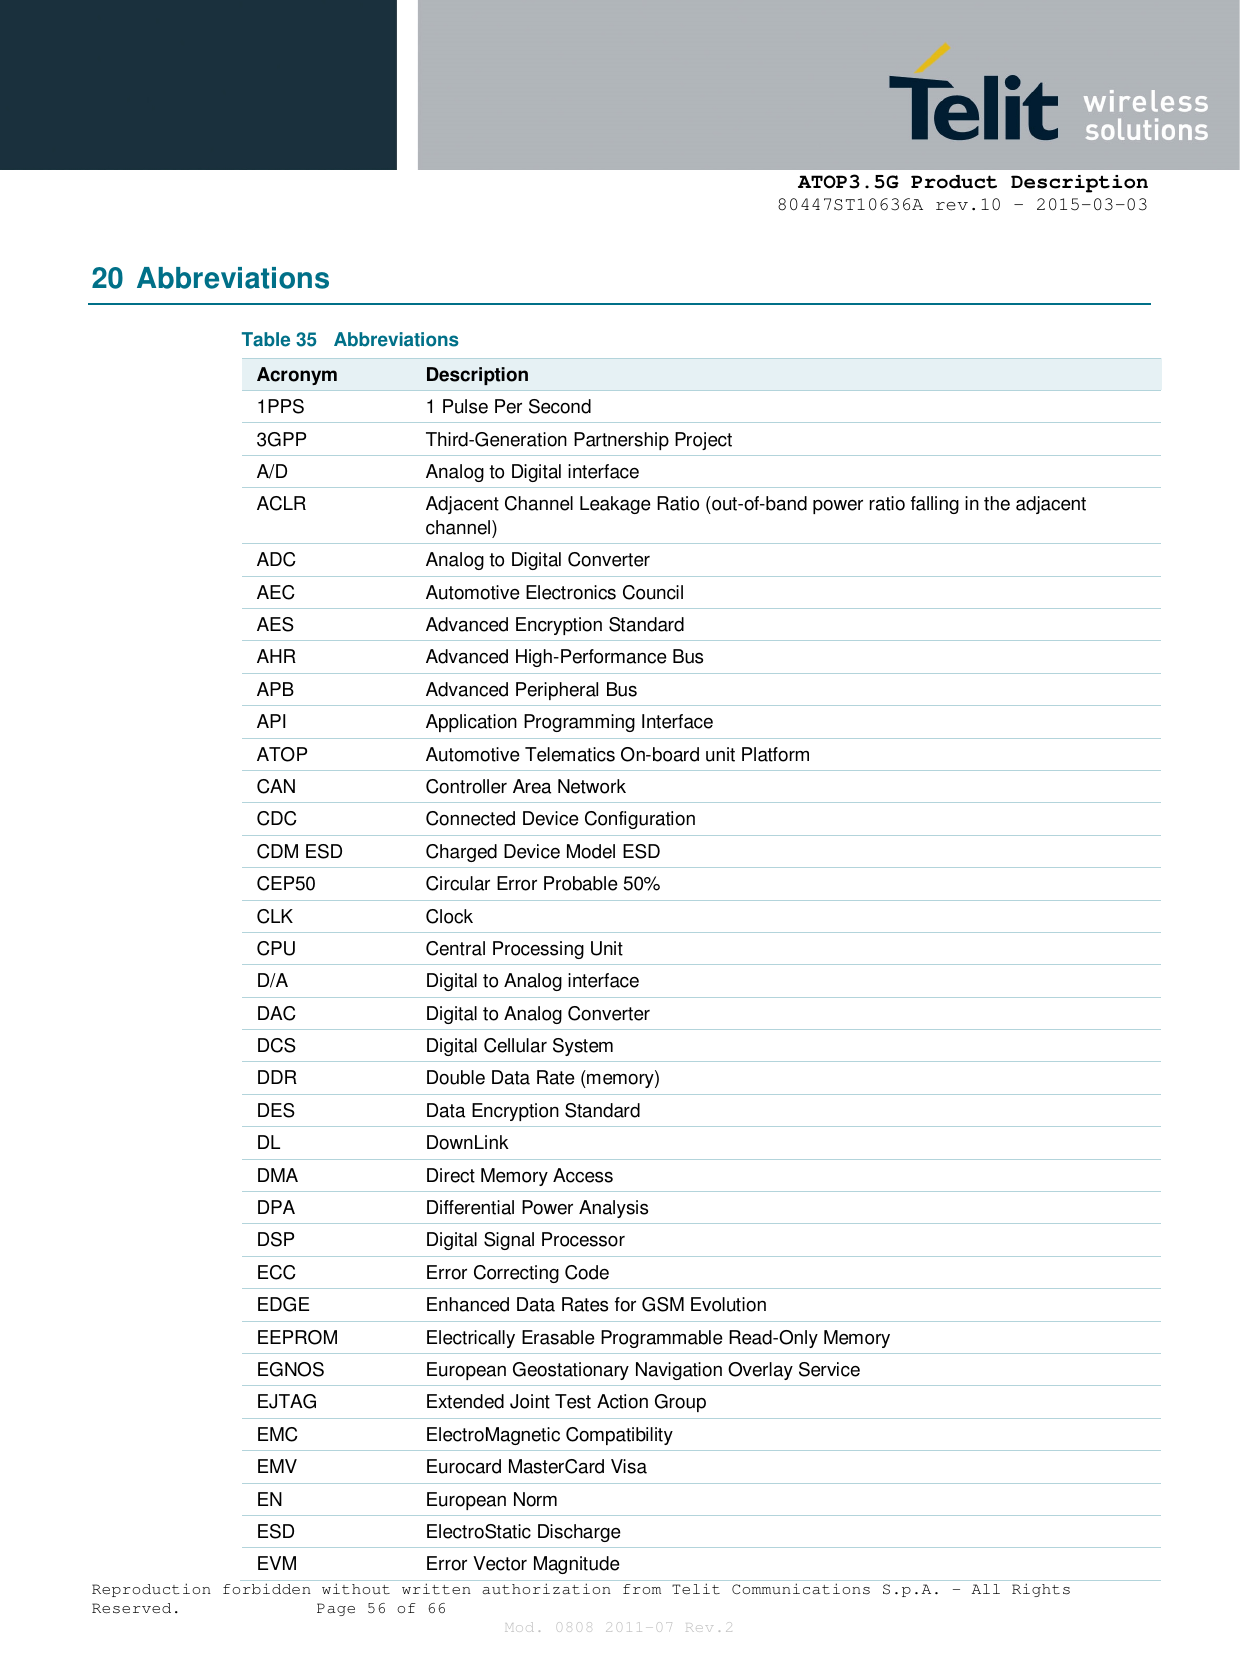      ATOP3.5G Product Description   80447ST10636A rev.10 – 2015-03-03  Reproduction forbidden without written authorization from Telit Communications S.p.A. - All Rights Reserved.    Page 56 of 66 Mod. 0808 2011-07 Rev.2 20 Abbreviations Table 35  Abbreviations Acronym Description 1PPS  1 Pulse Per Second 3GPP  Third-Generation Partnership Project A/D  Analog to Digital interface ACLR  Adjacent Channel Leakage Ratio (out-of-band power ratio falling in the adjacent channel) ADC  Analog to Digital Converter AEC  Automotive Electronics Council AES  Advanced Encryption Standard AHR  Advanced High-Performance Bus APB  Advanced Peripheral Bus API  Application Programming Interface ATOP  Automotive Telematics On-board unit Platform CAN  Controller Area Network CDC  Connected Device Configuration CDM ESD  Charged Device Model ESD CEP50  Circular Error Probable 50% CLK  Clock CPU  Central Processing Unit D/A  Digital to Analog interface DAC  Digital to Analog Converter DCS  Digital Cellular System DDR  Double Data Rate (memory) DES  Data Encryption Standard DL  DownLink DMA  Direct Memory Access DPA  Differential Power Analysis DSP  Digital Signal Processor ECC  Error Correcting Code EDGE  Enhanced Data Rates for GSM Evolution EEPROM  Electrically Erasable Programmable Read-Only Memory EGNOS  European Geostationary Navigation Overlay Service EJTAG  Extended Joint Test Action Group EMC  ElectroMagnetic Compatibility EMV  Eurocard MasterCard Visa EN  European Norm ESD  ElectroStatic Discharge EVM  Error Vector Magnitude 